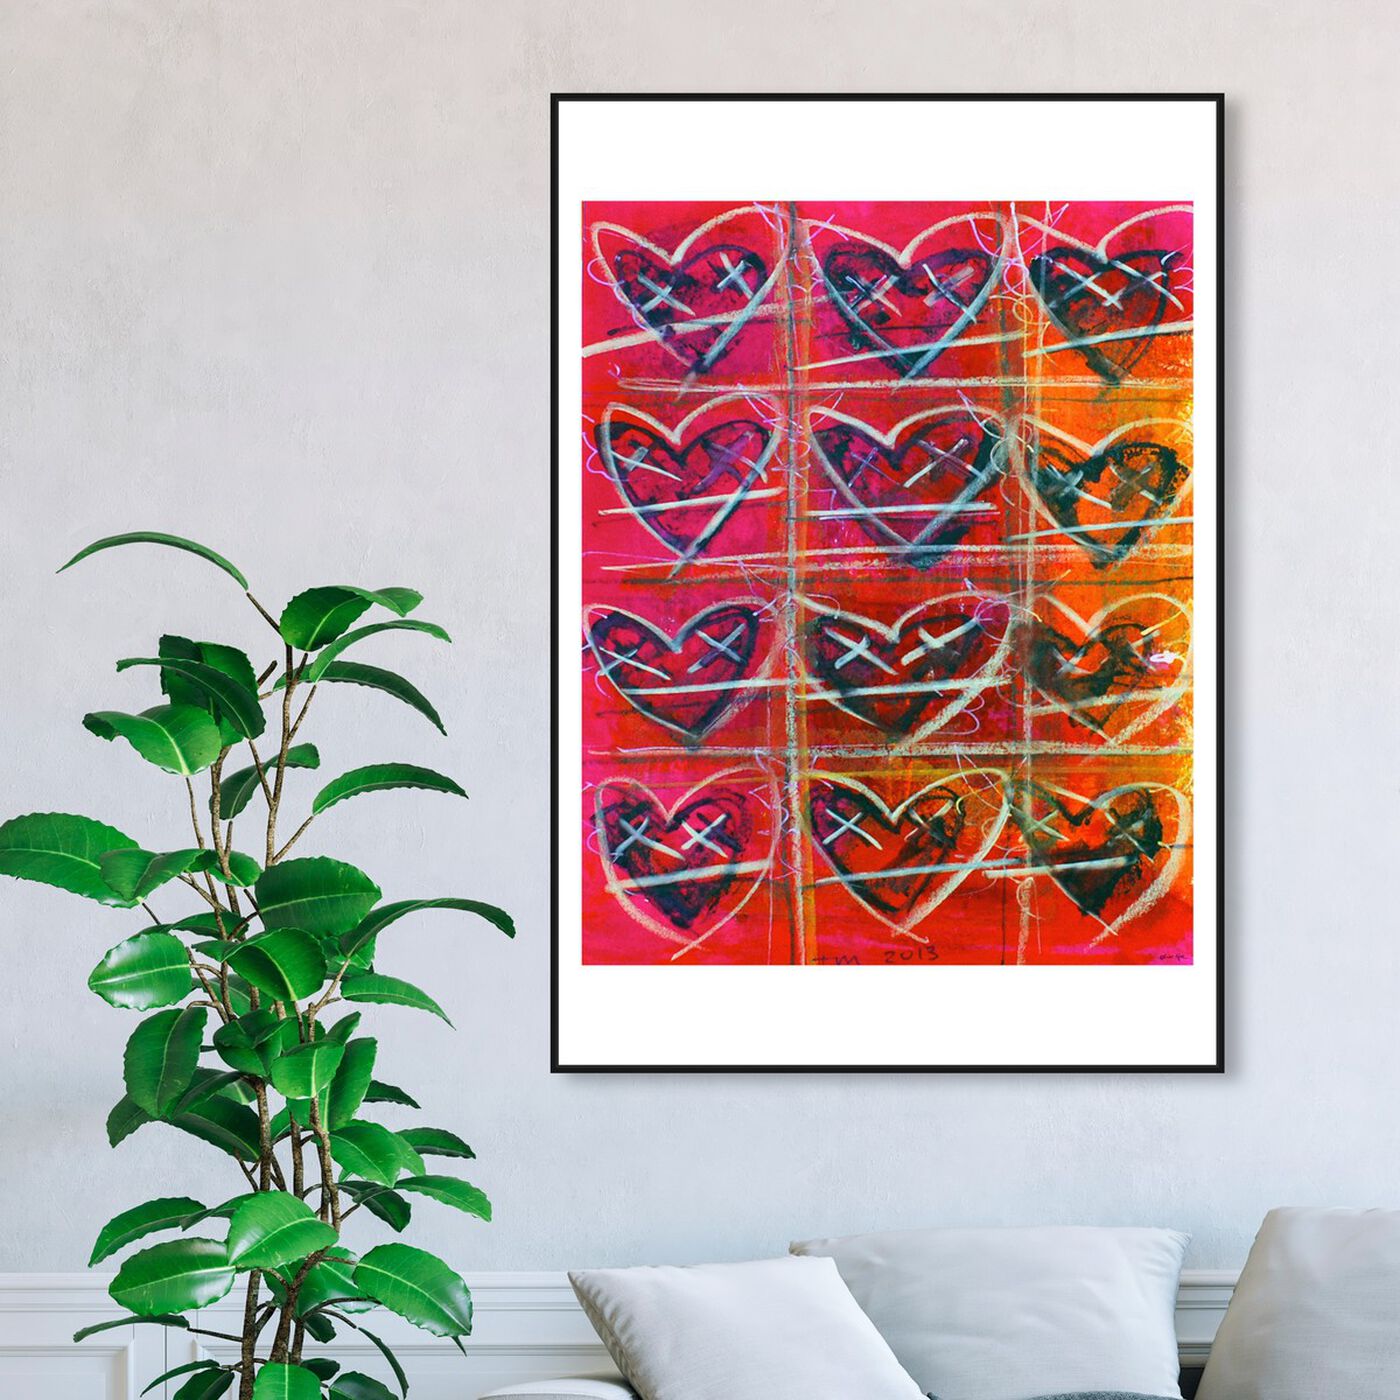 Hanging view of HeartFIRE by Tiago Magro featuring symbols and objects and shapes art.